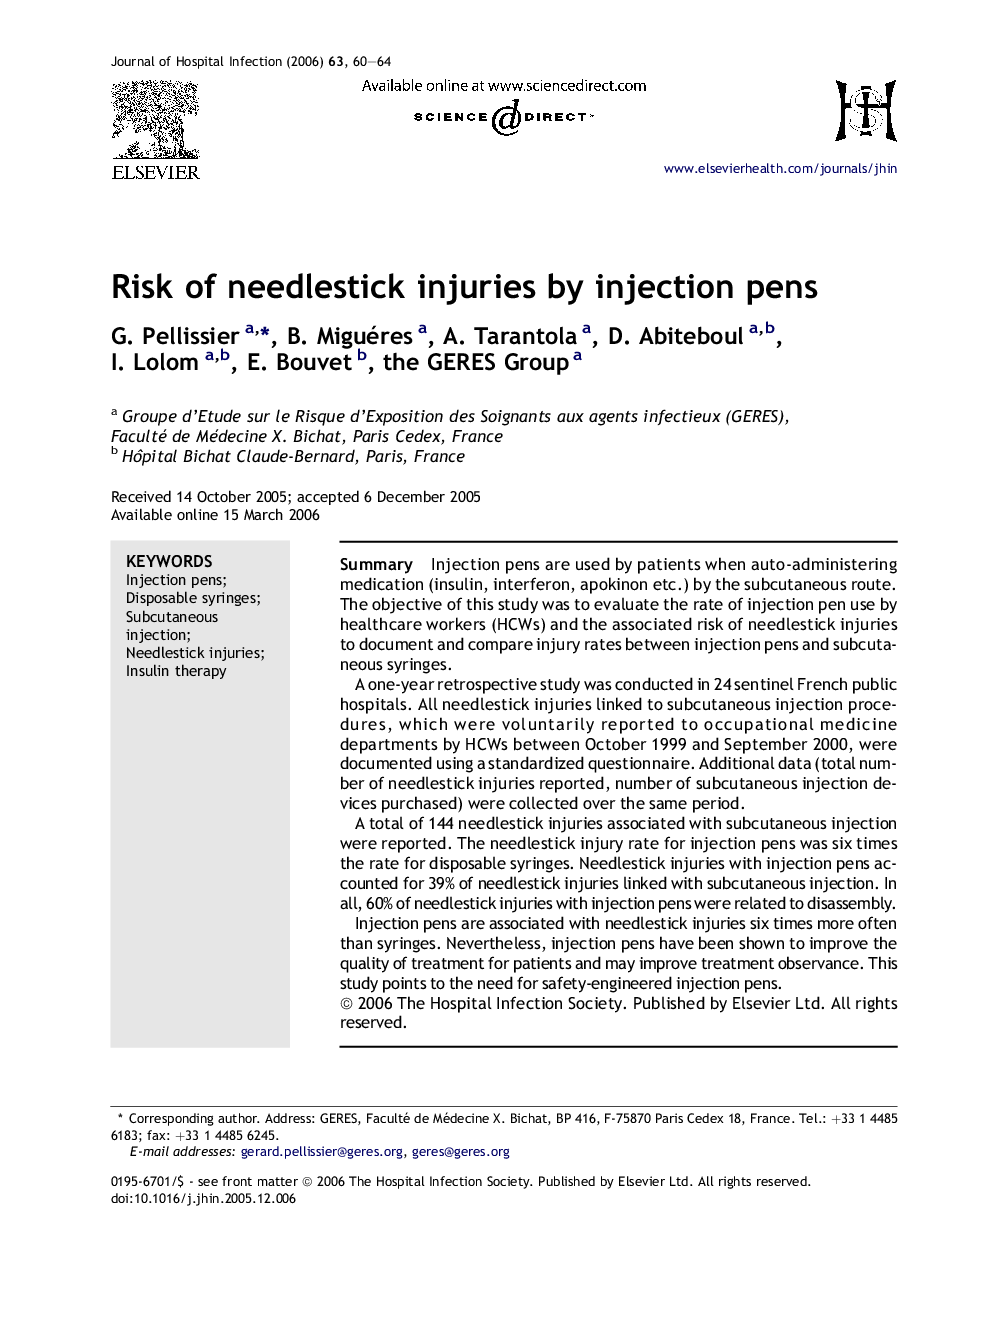 Risk of needlestick injuries by injection pens